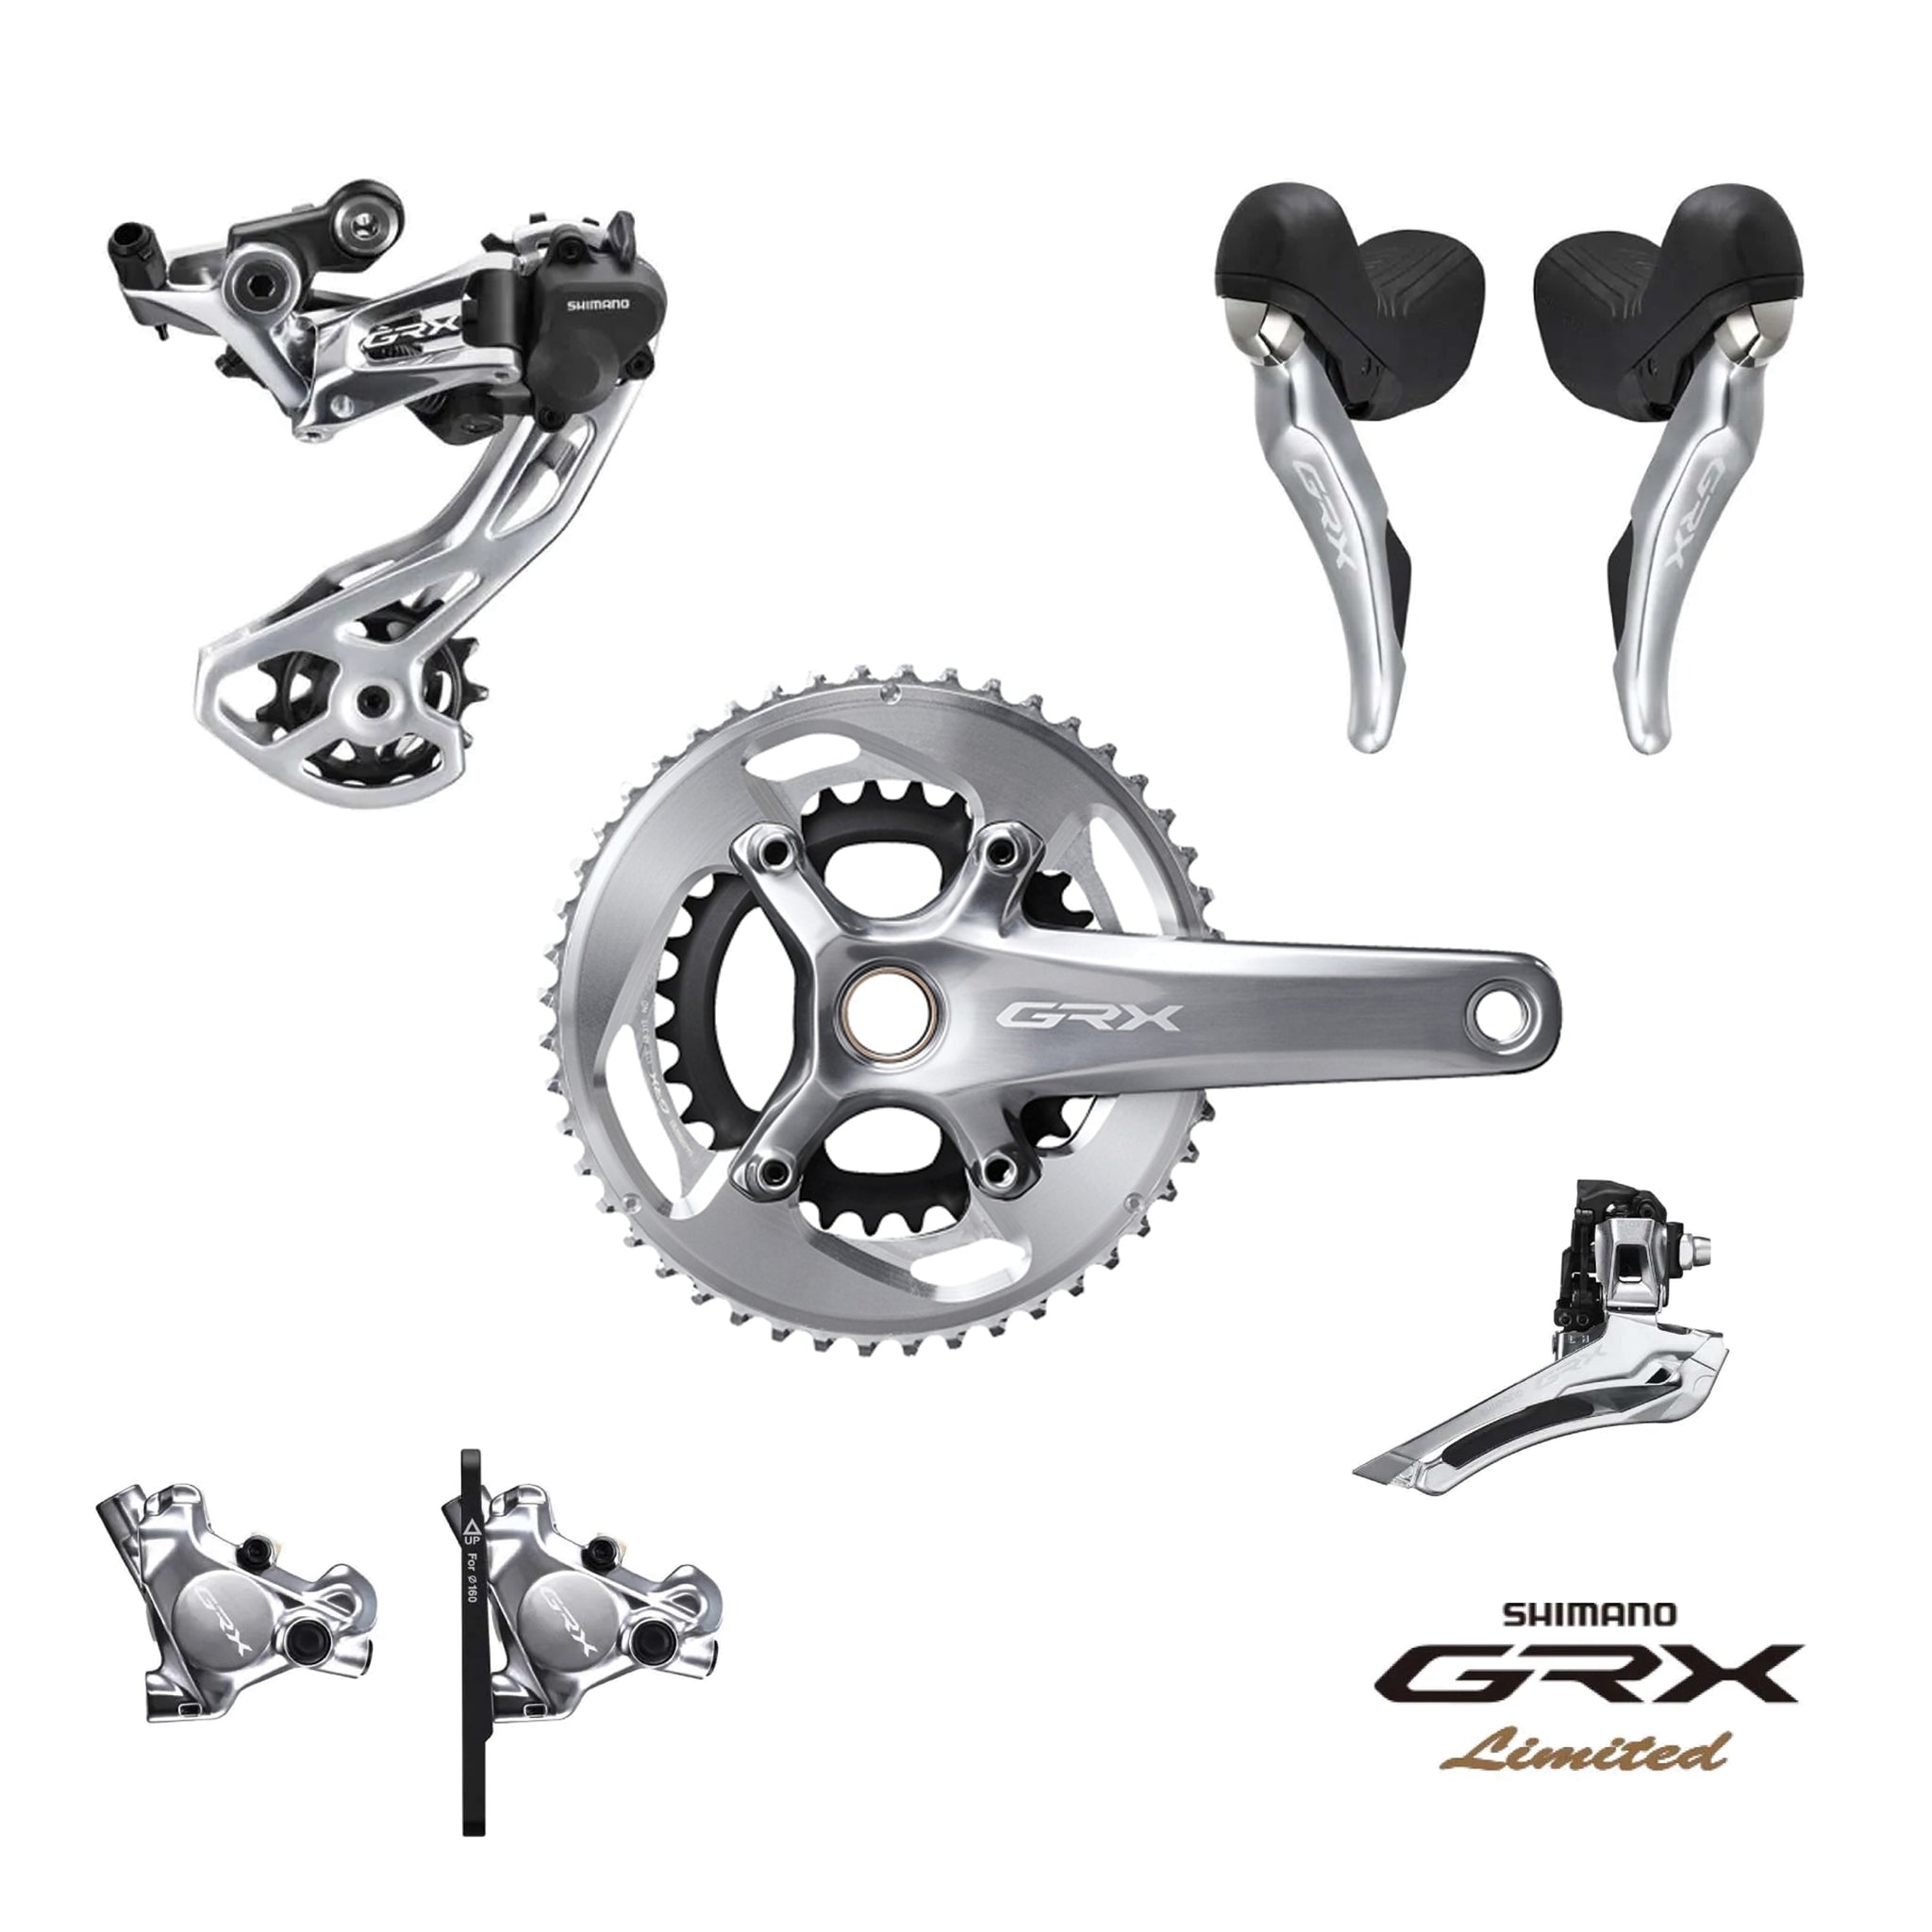 Shimano GRX RX810 Limited 2x11 groupset